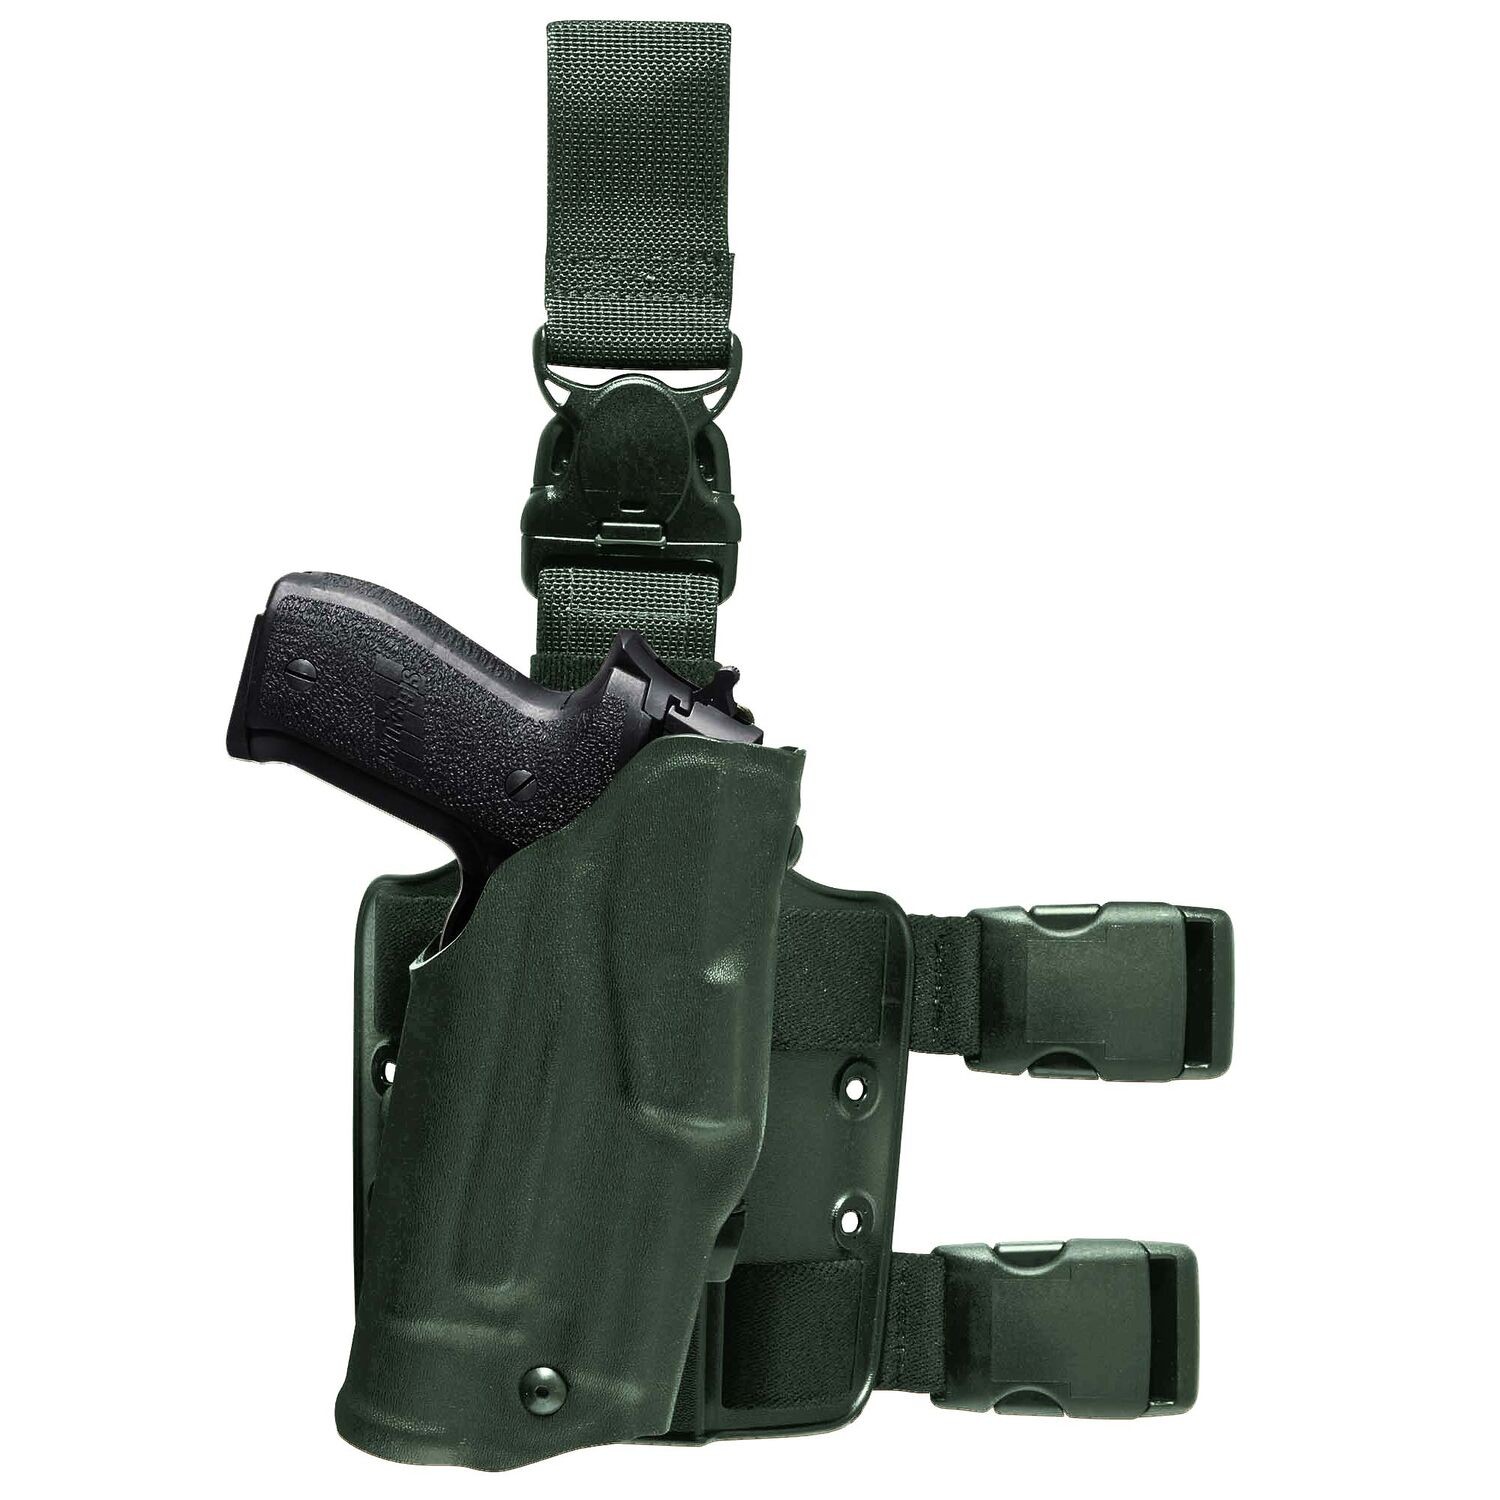 Model 6355 ALS Tactical Holster with Quick Release Leg Harness